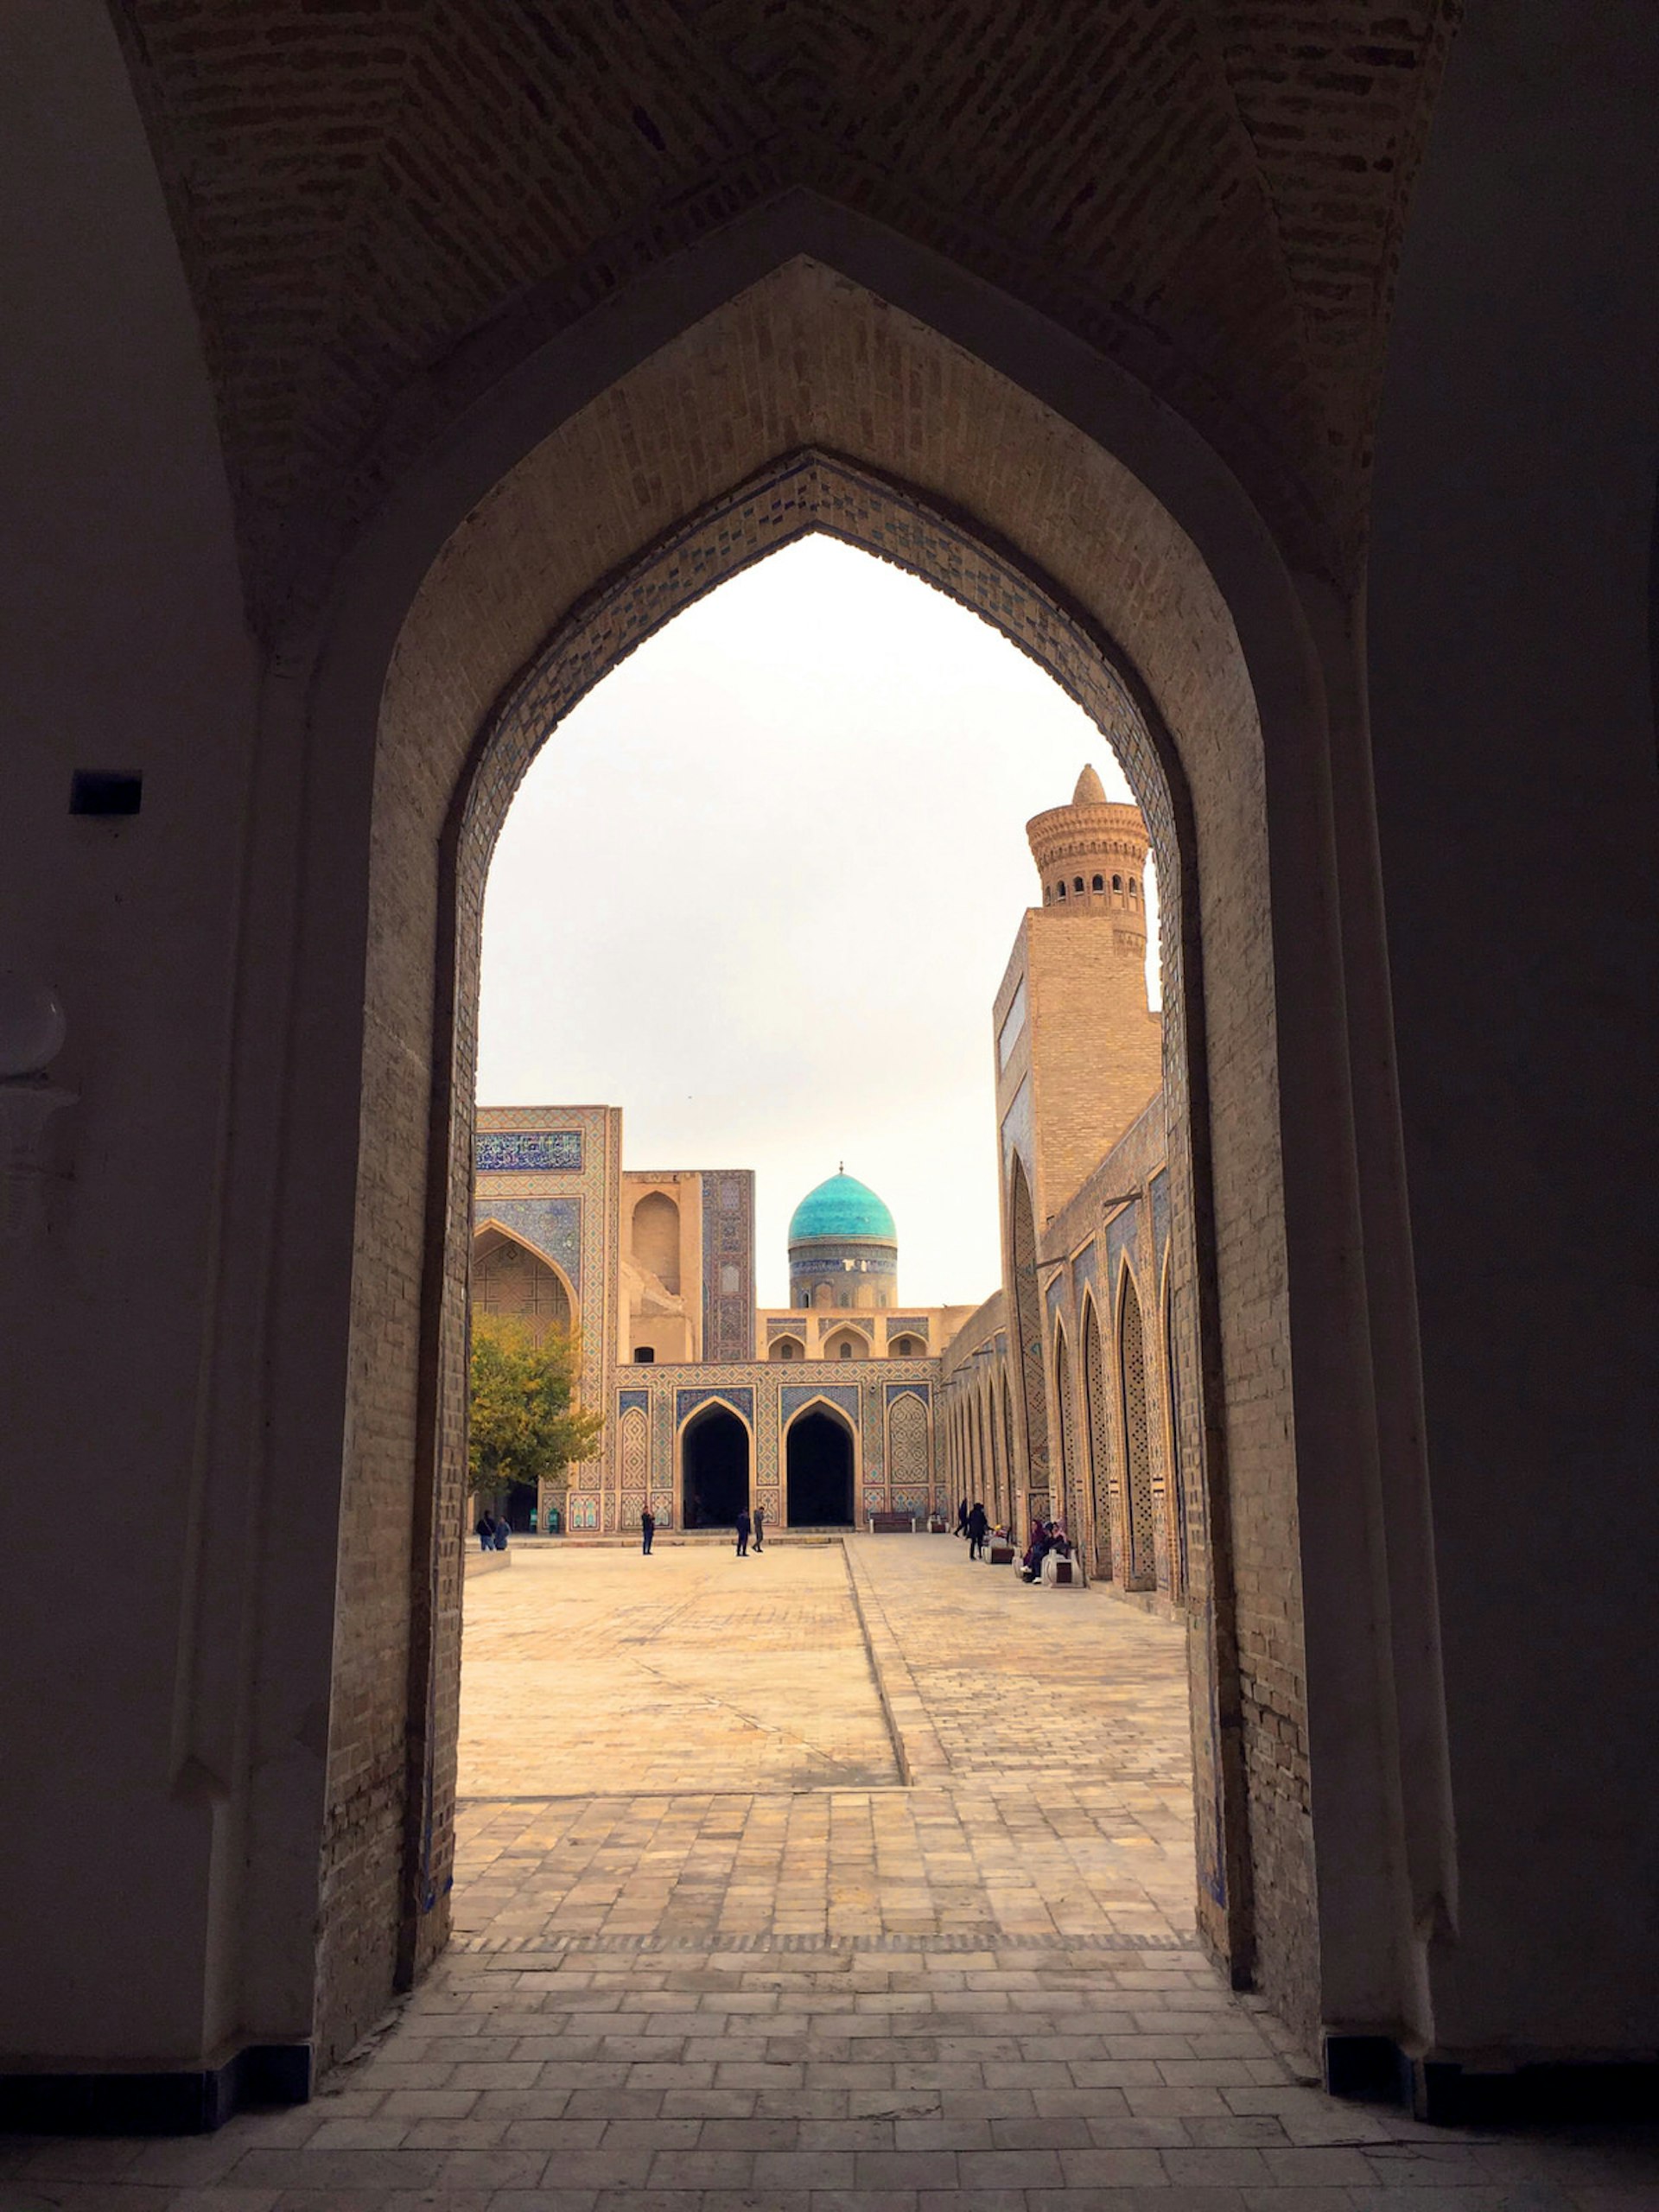 The inner courtyard of Kalon Mosque with blue dome and minaret as seen through a pointed arched doorway.